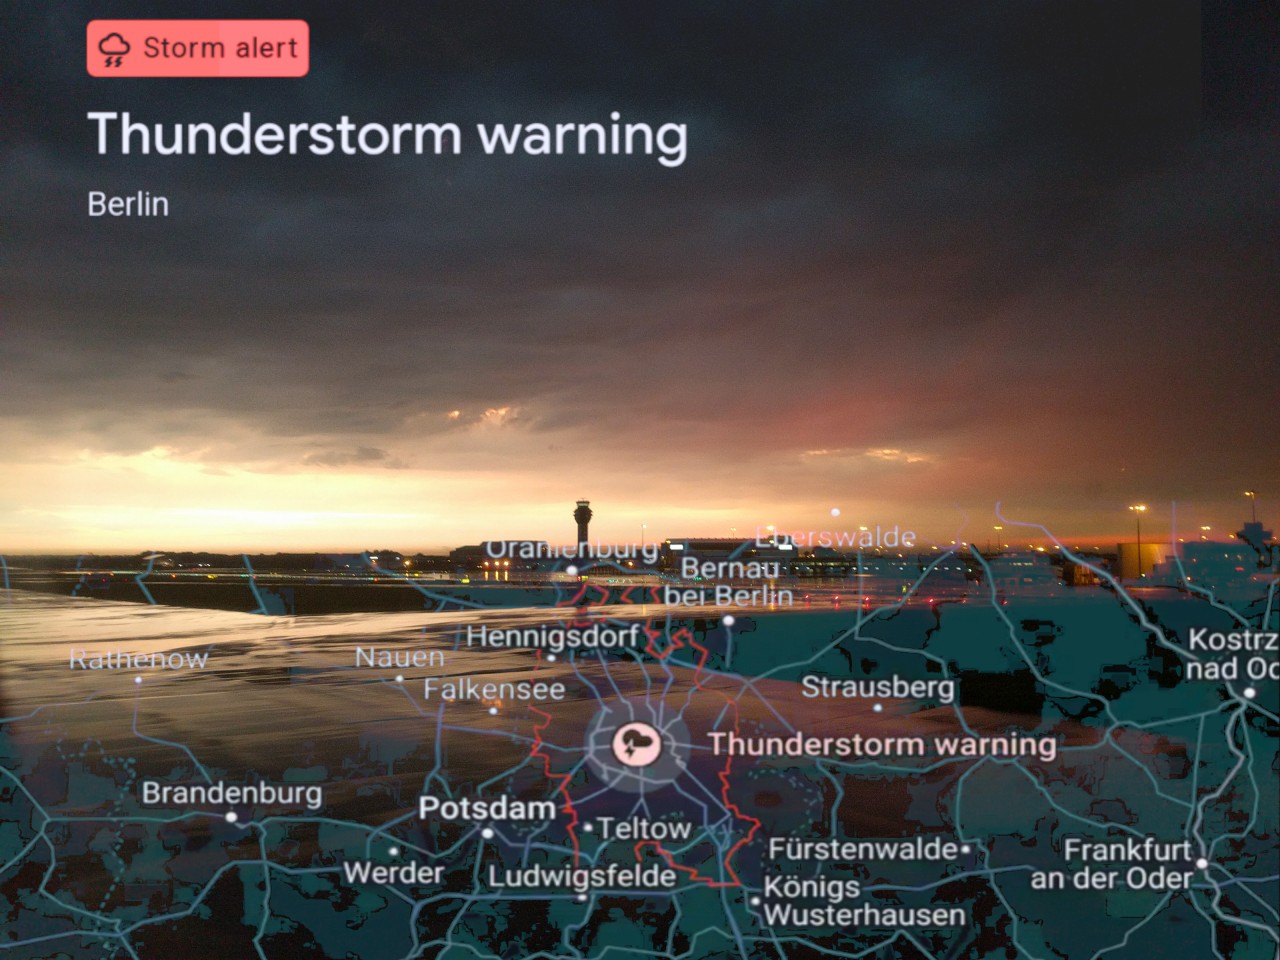 Google thunderstorm weather alert with map of Berlin and airport in background